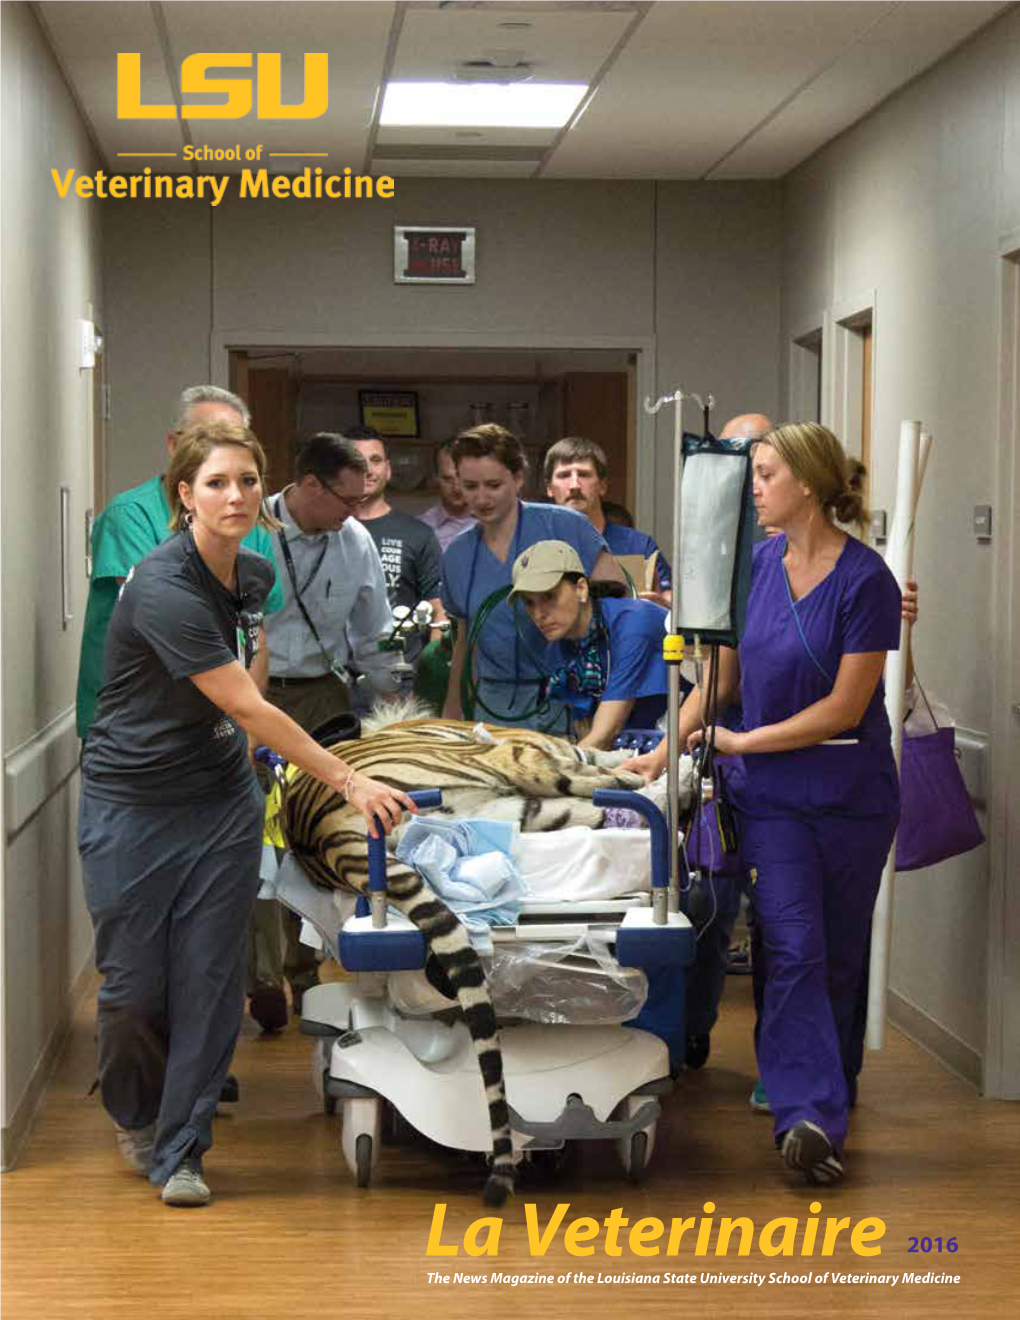 La Veterinaire 2016 the News Magazine of the Louisiana State University School of Veterinary Medicine LETTER from OUR DEAN